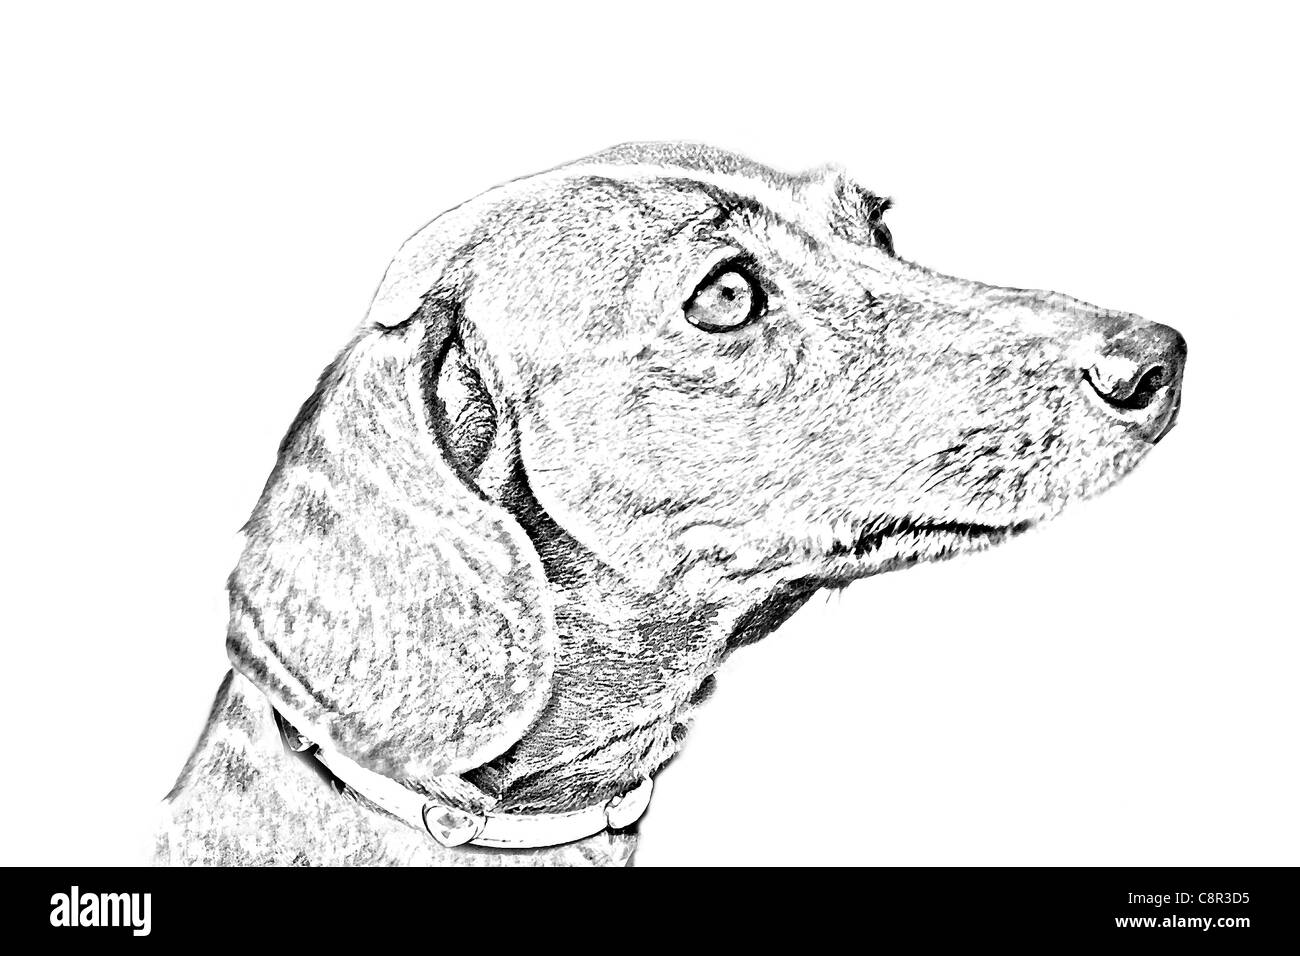 Sketch style portrait of a Dachshund or Wiener dog Stock Photo